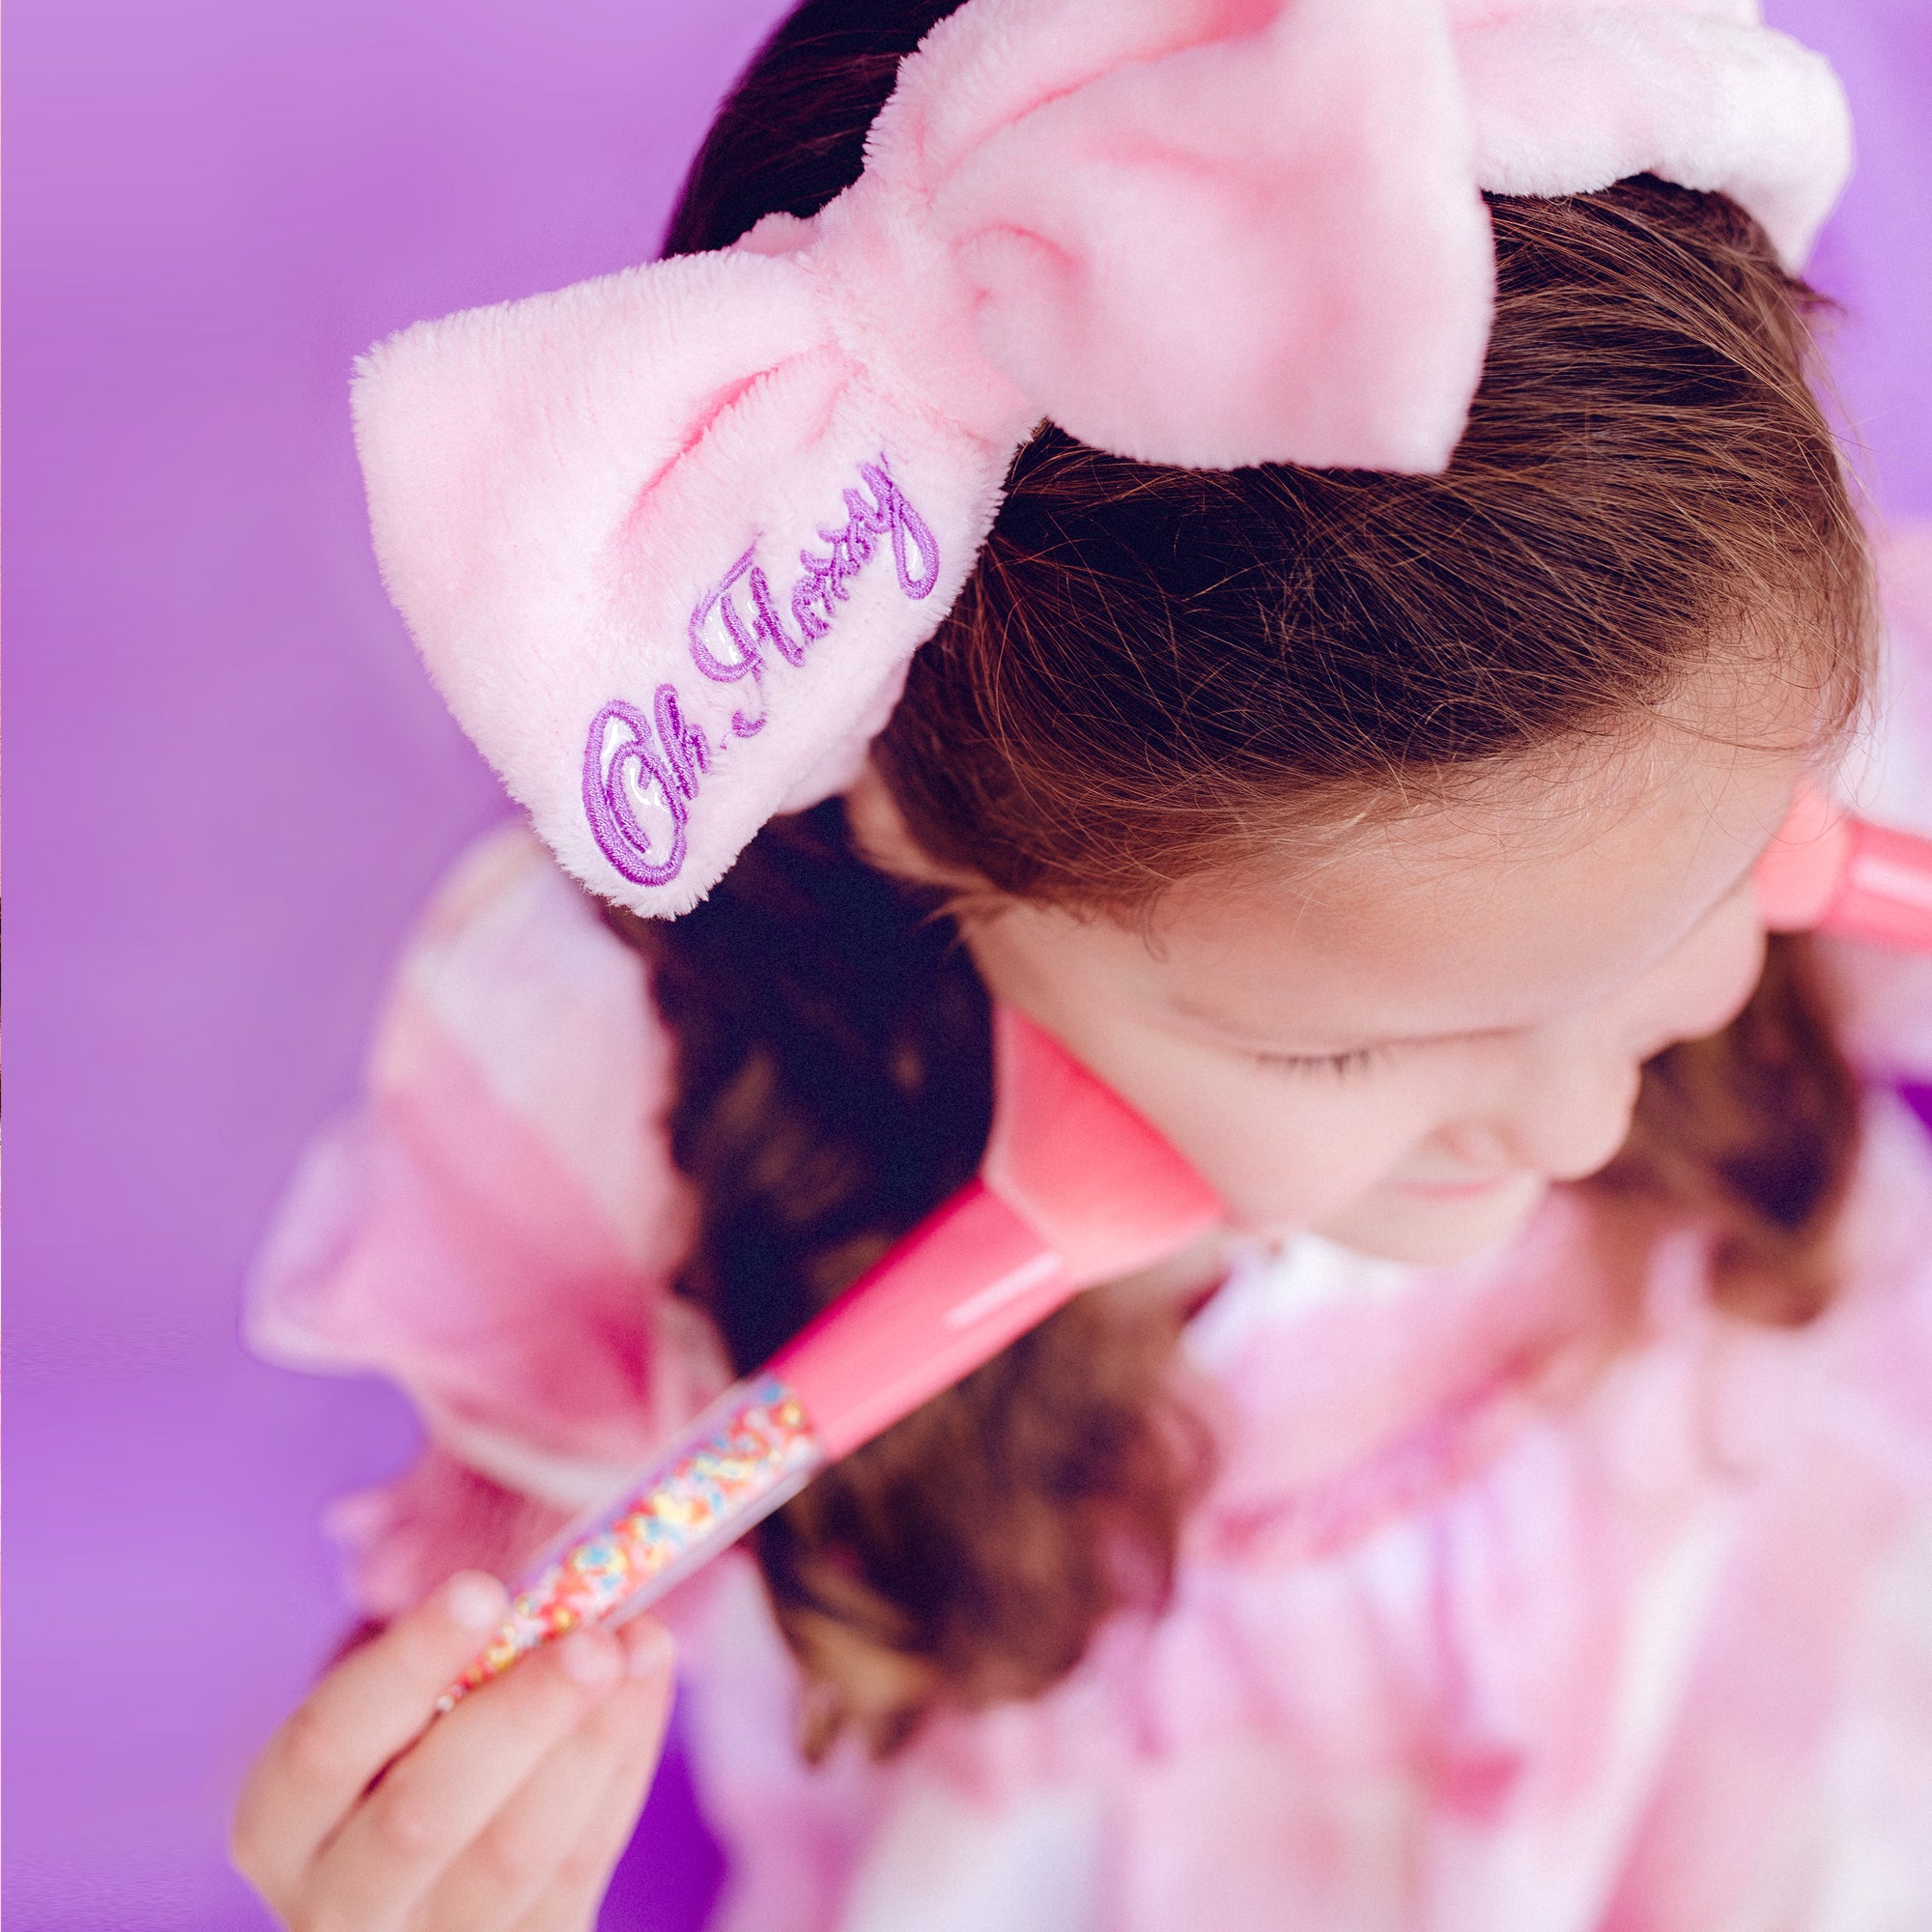 Oh Flossy Kids Makeup Accessories Collection